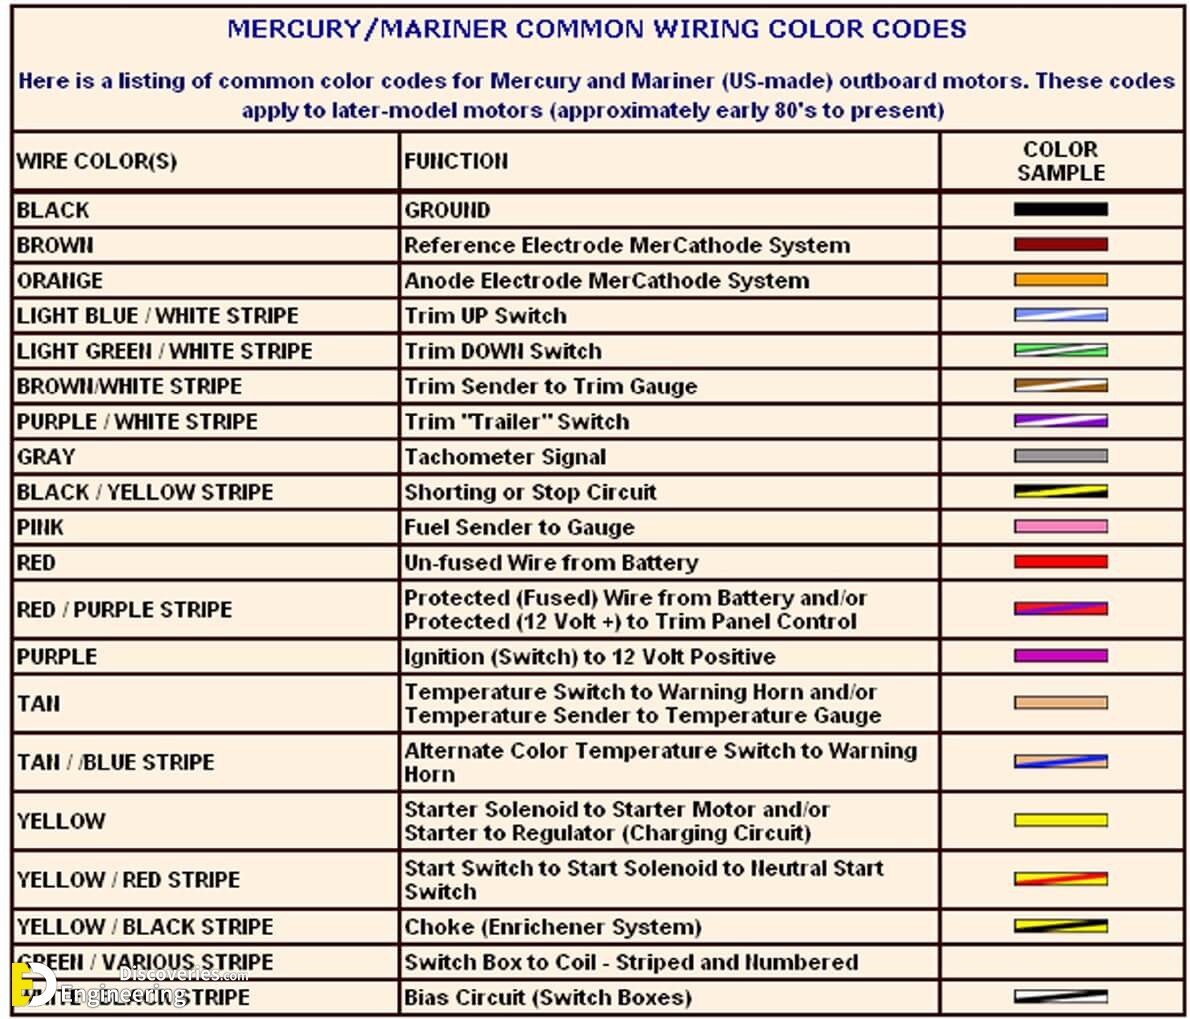 Electrical Wiring Color Coding System, 2006 Mercury Outboard Wiring Harness Color Code